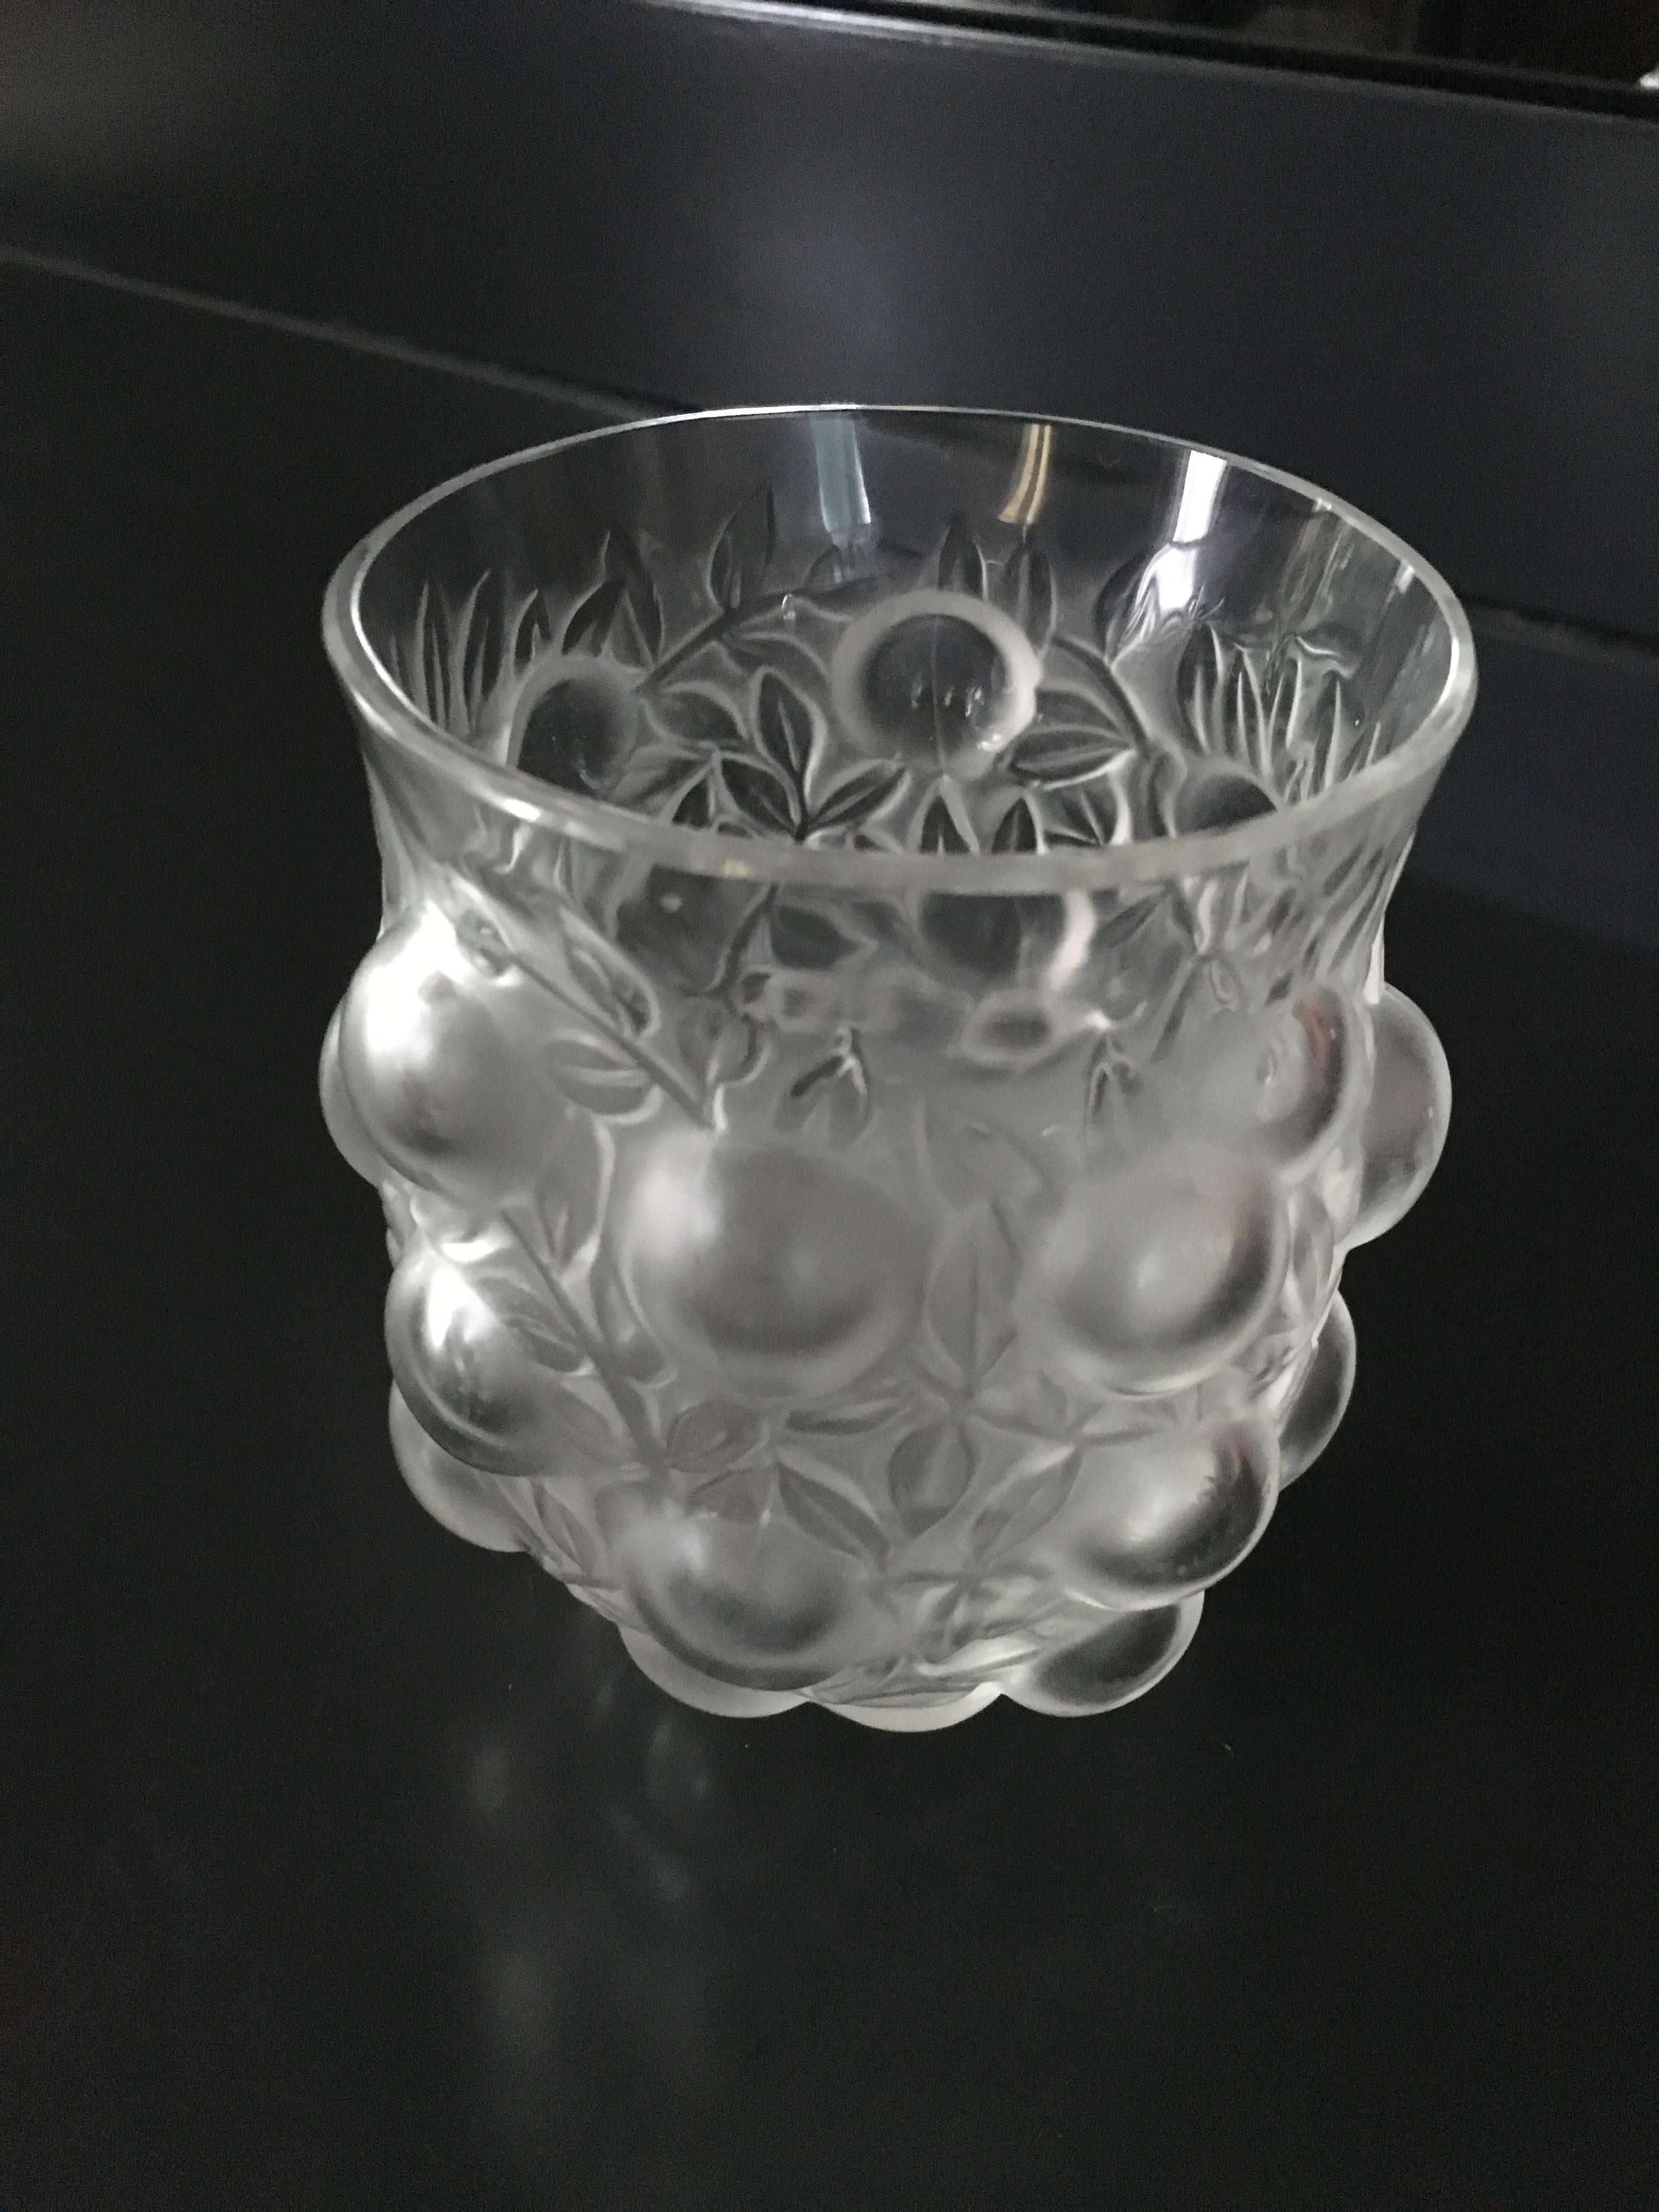 Small R. Lalique bud vase or vessel for anything your heart desires.